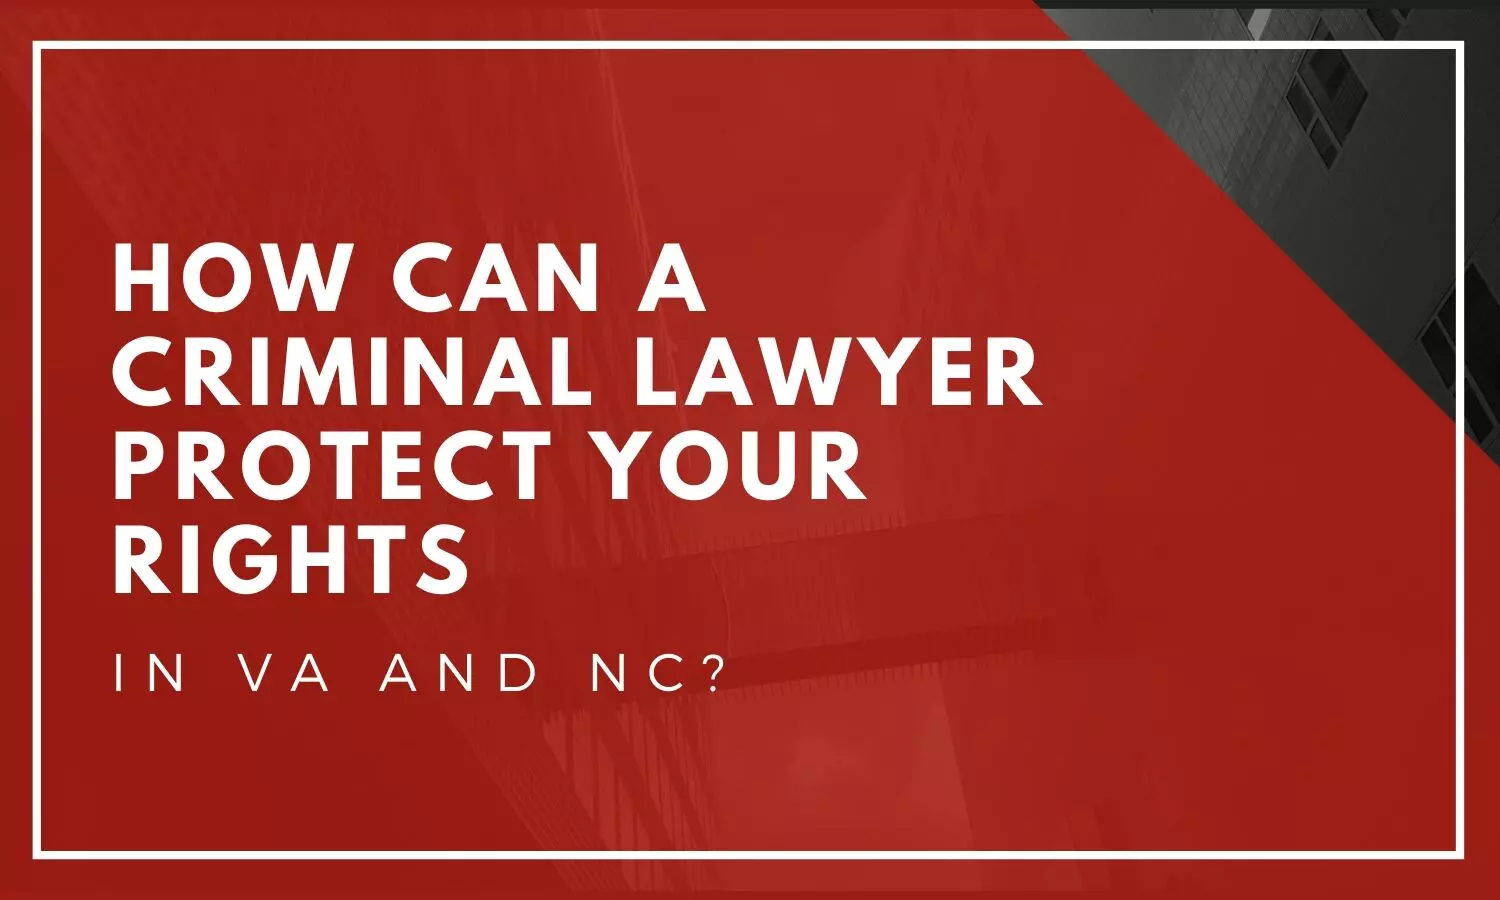 How can a Criminal Lawyer protect your Rights in VA and NC?